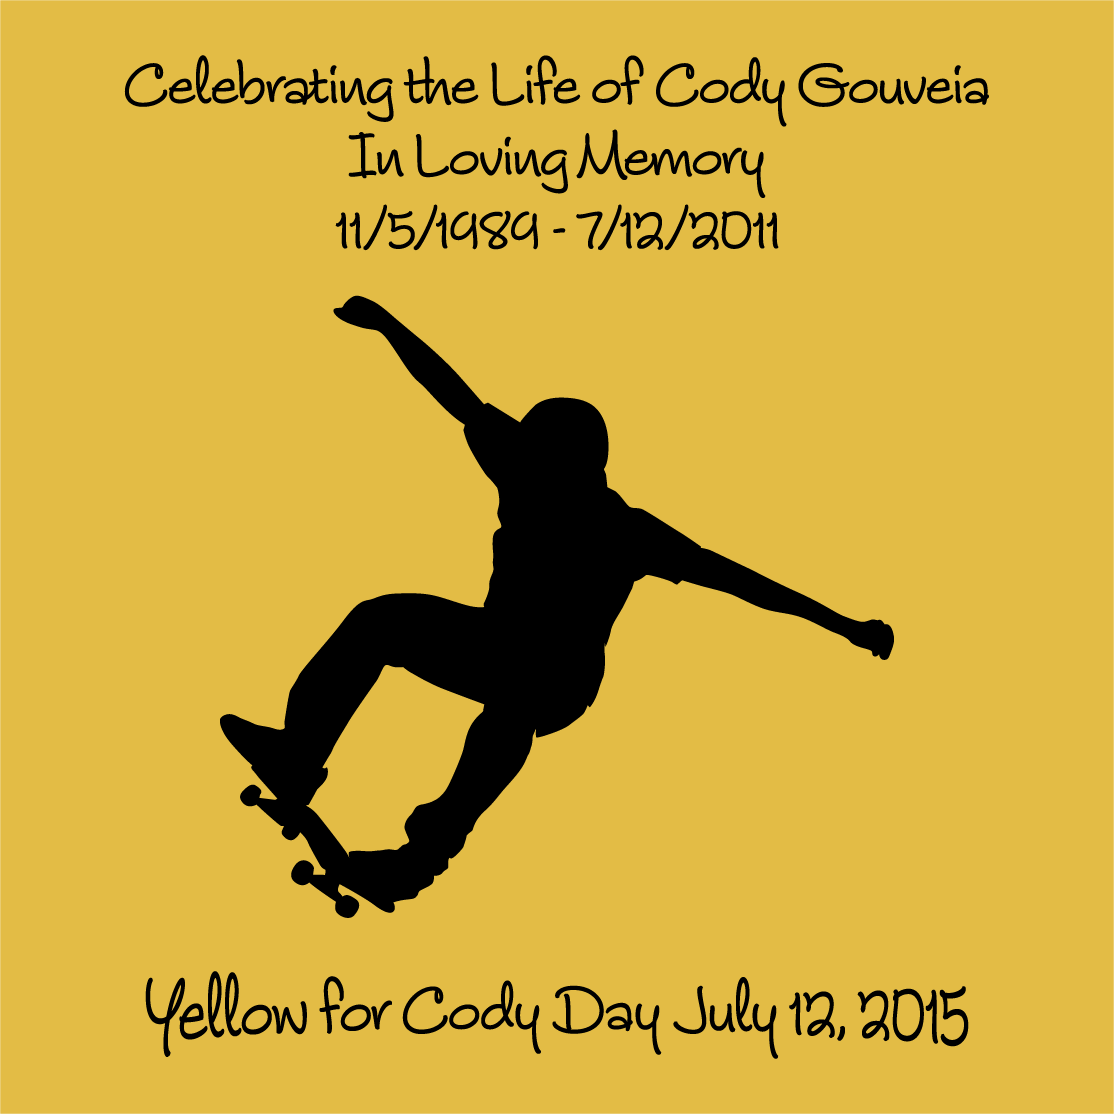 Yellow for Cody Day July 12, 2015 shirt design - zoomed